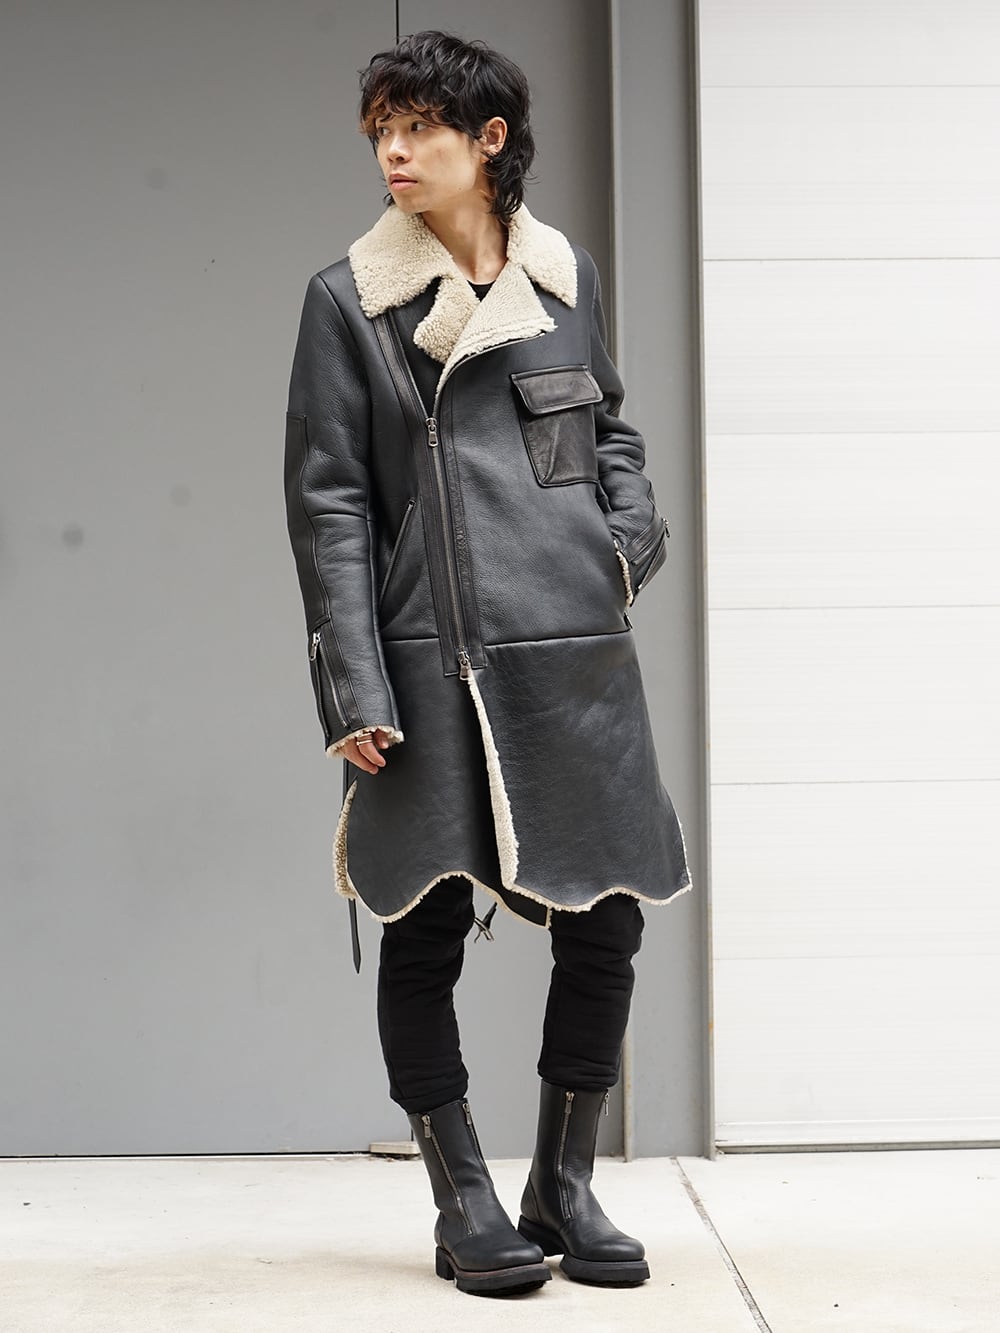 The Viridi-anne Mouton Coat 18-19AW Style - FASCINATE BLOG